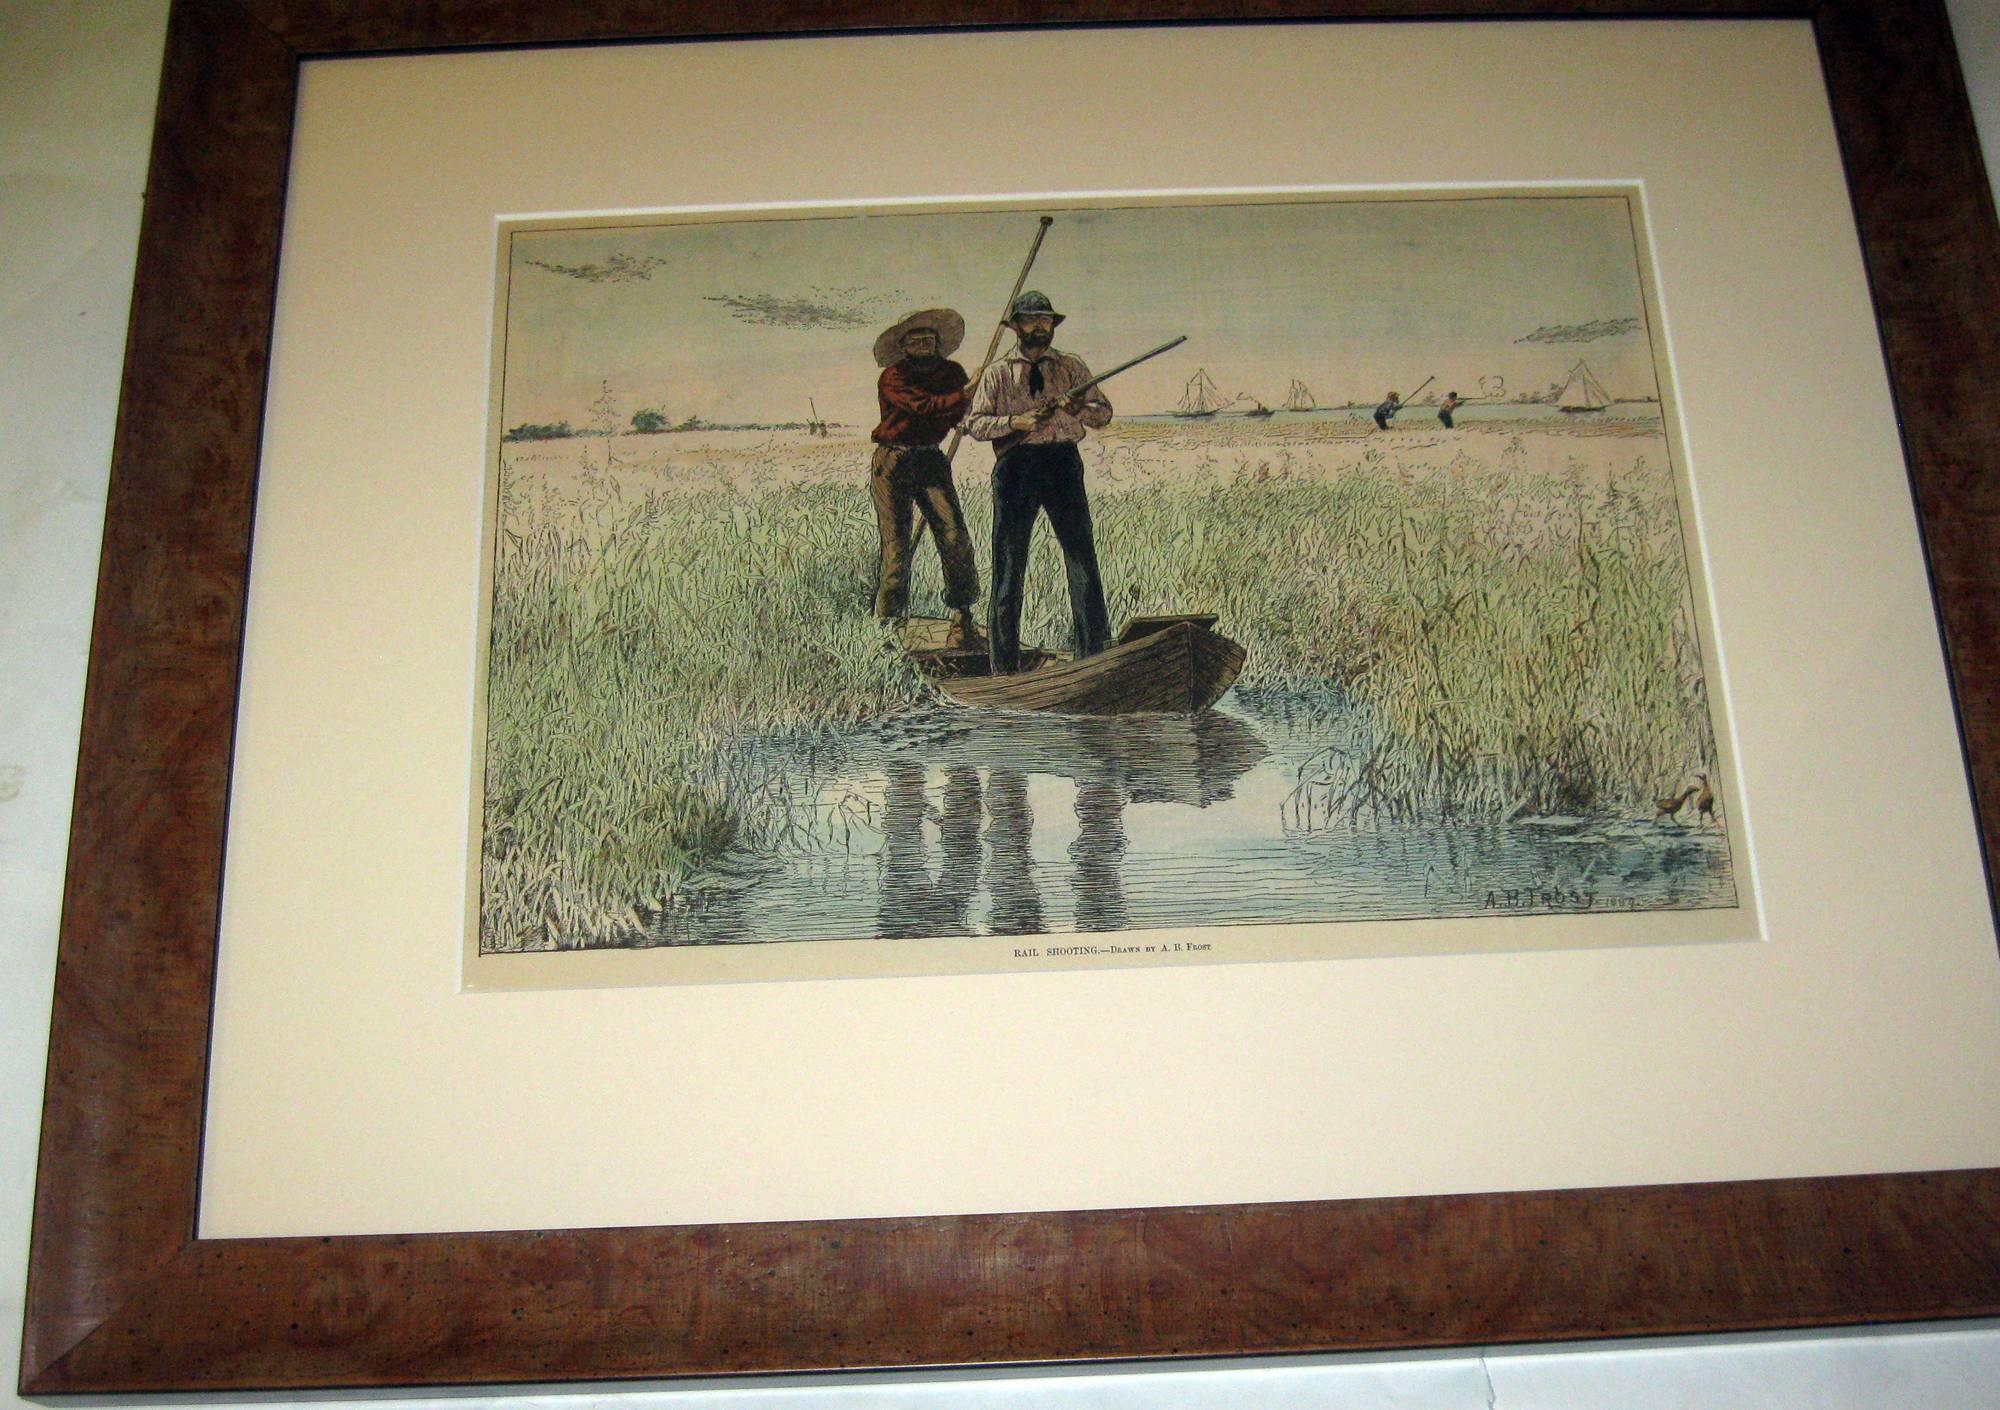 Set of four prints; Snipe Shooting- 1898, A Pot Hunter-1884,
A Tempting Shot- 1884, Rail Shooting-1898, from Harper's Weekly, New York, by A.B. Frost. Beautifully newly matted and framed in wooden frames. Frame edge measures 1.75 inches